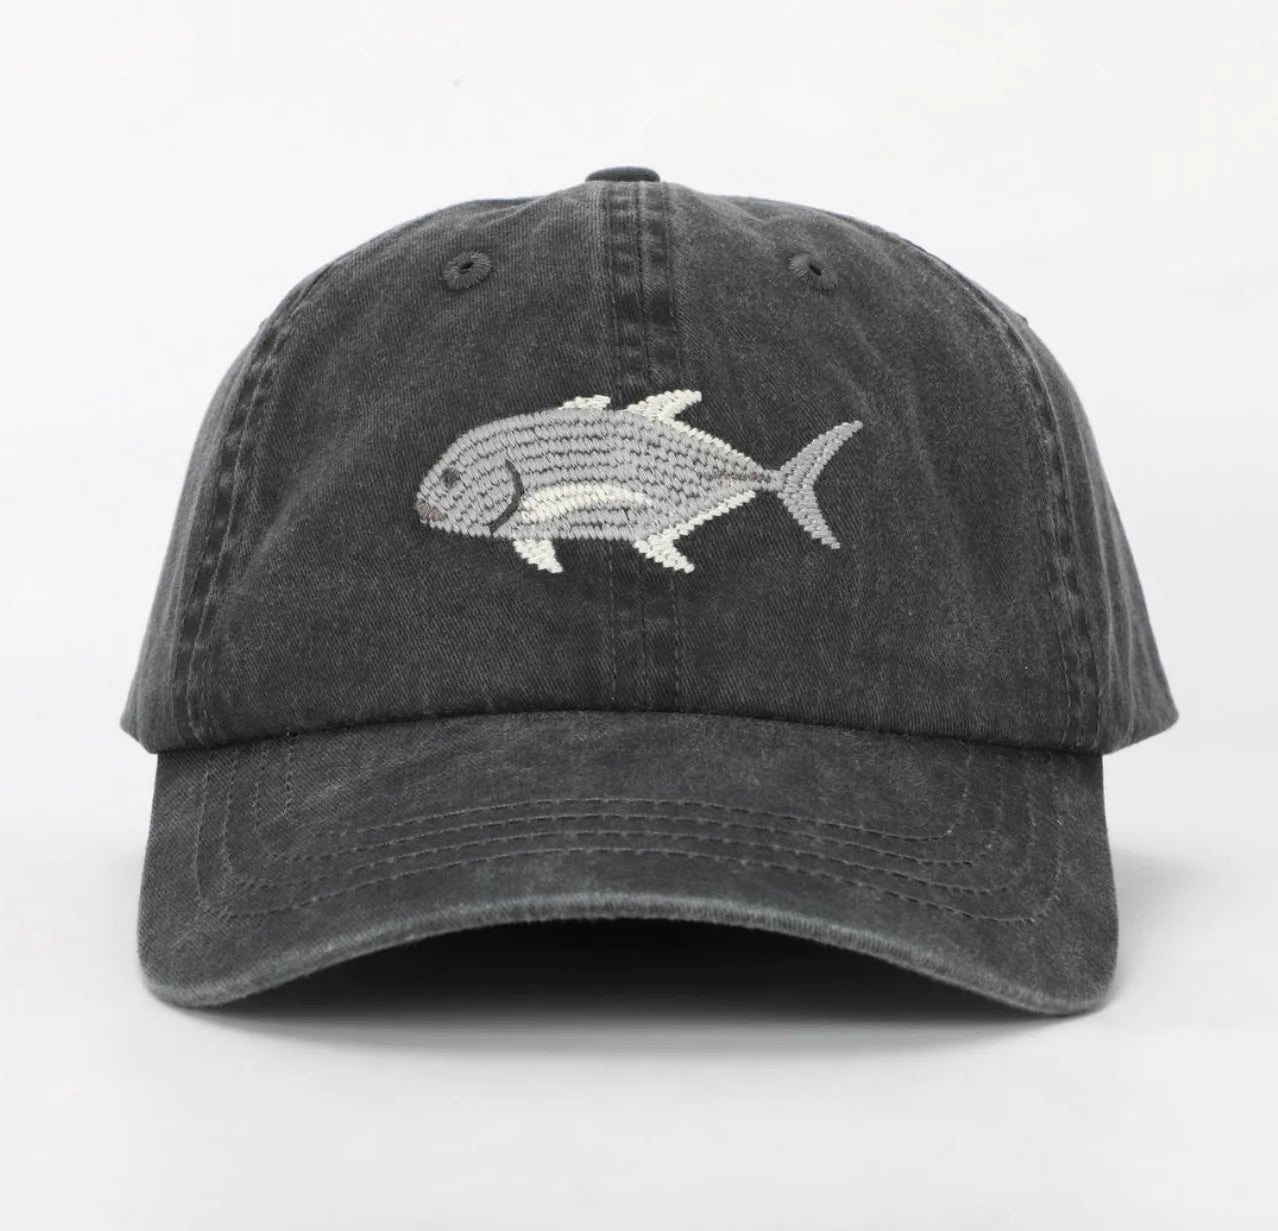 Giant Trevally Lid